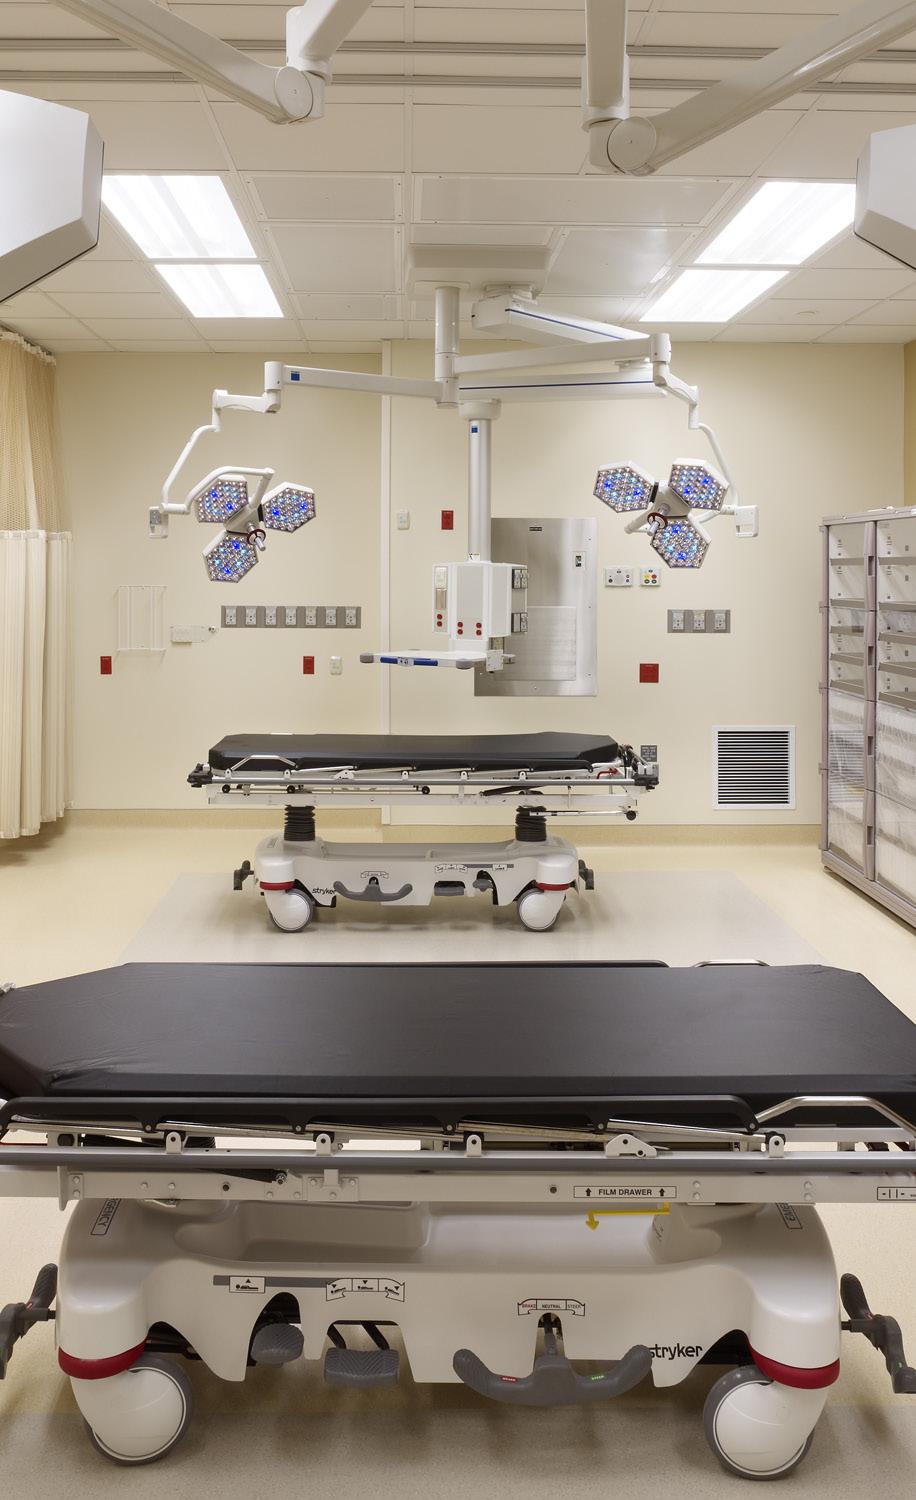 In a medica center such as Saint Francis, a cean and modern design aesthetic directy refects that faciity s commitment to evoving technoogies and meticuous patient care.